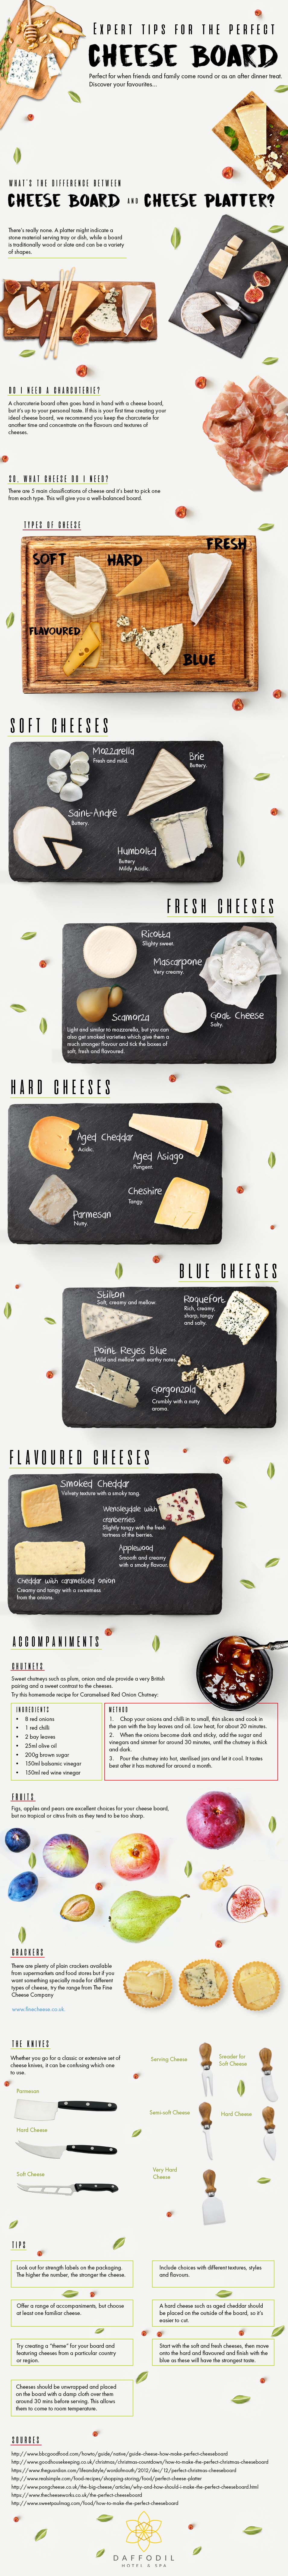 Expert Tips for the Perfect Cheese Board